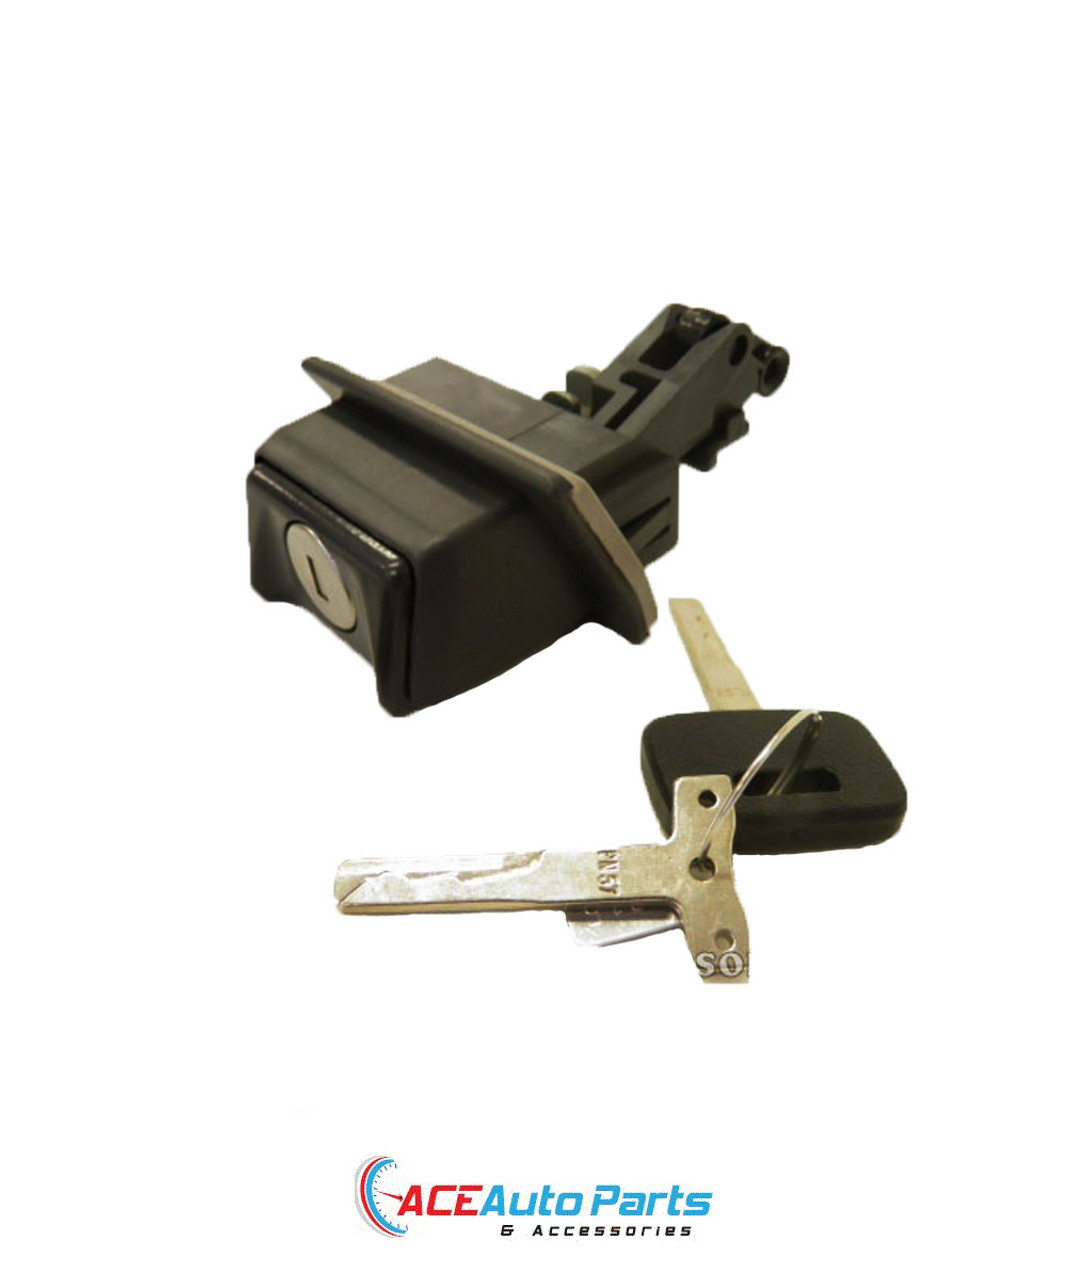 Tailgate lock with keys for Commodore VN+VP+VR+VS Station wagon